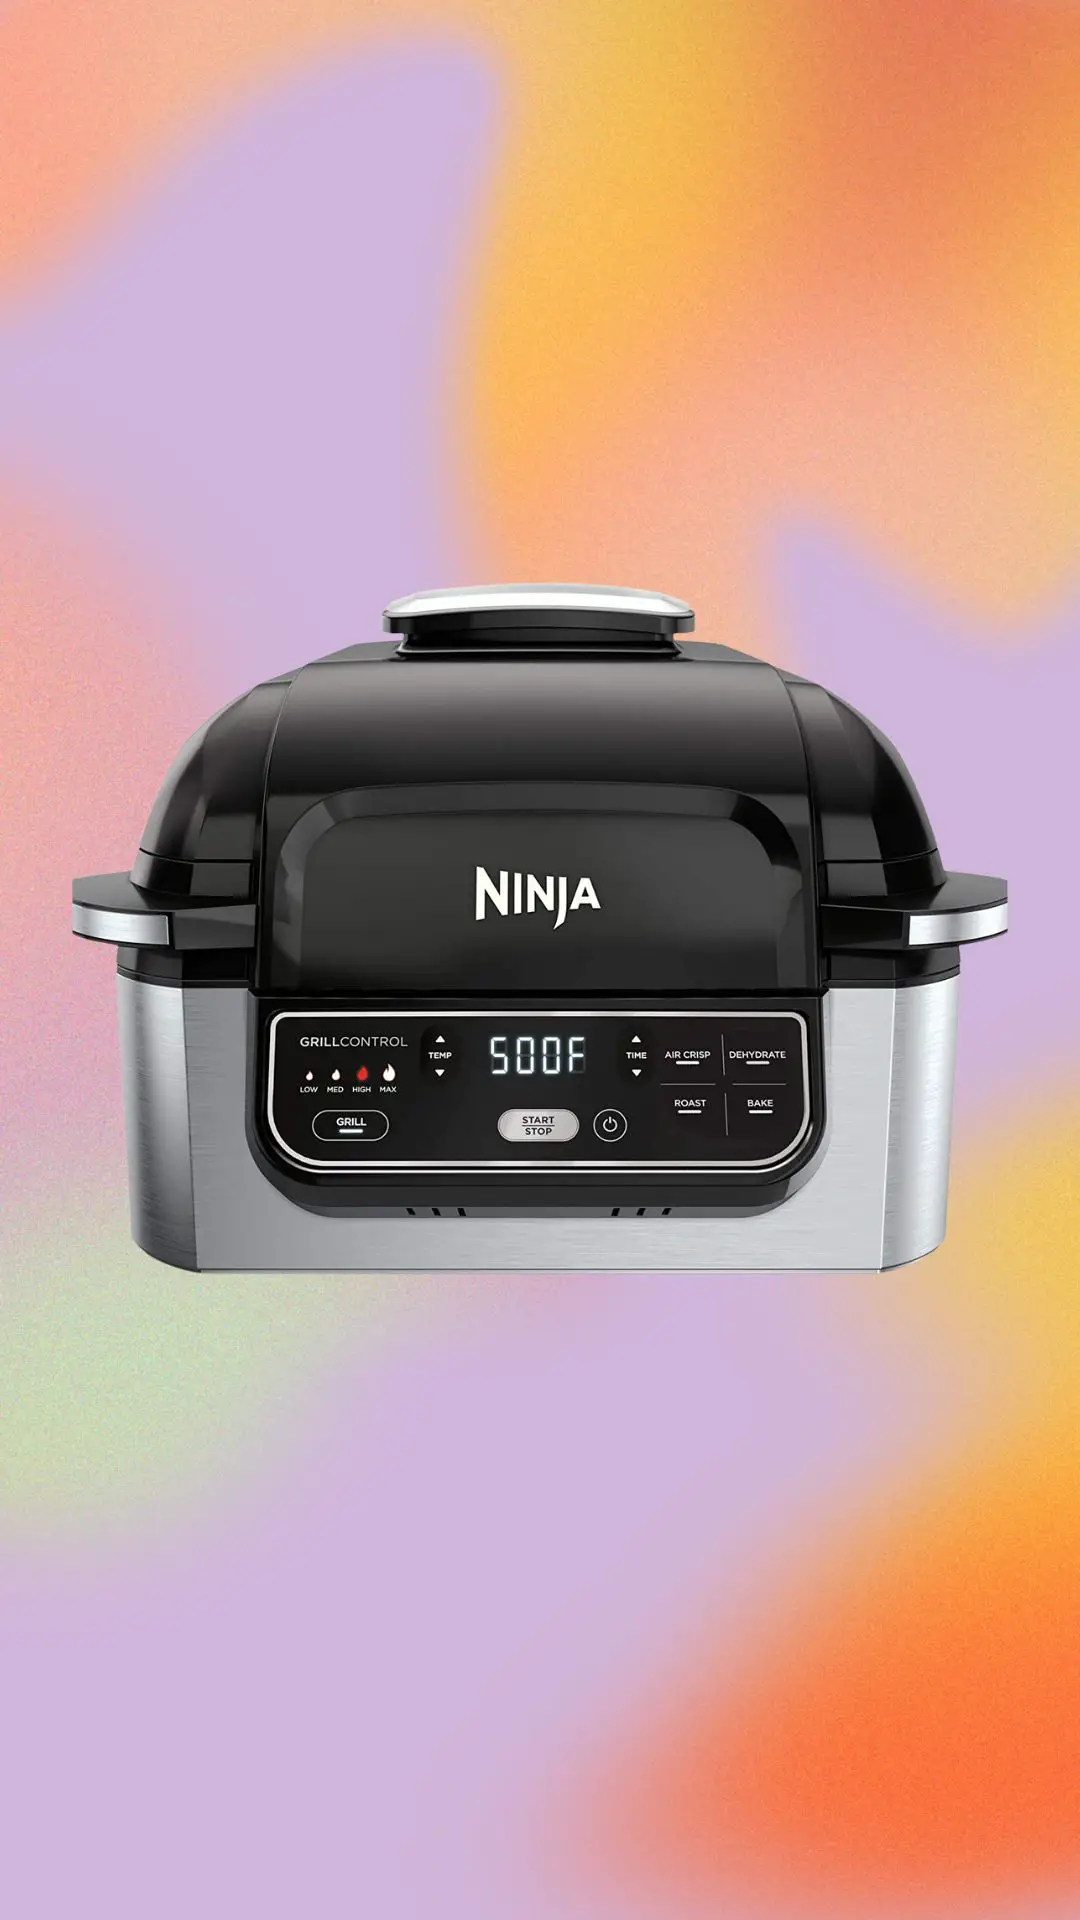 Ninja AG301 Foodi 5-in-1 Indoor Grill with Air Fry